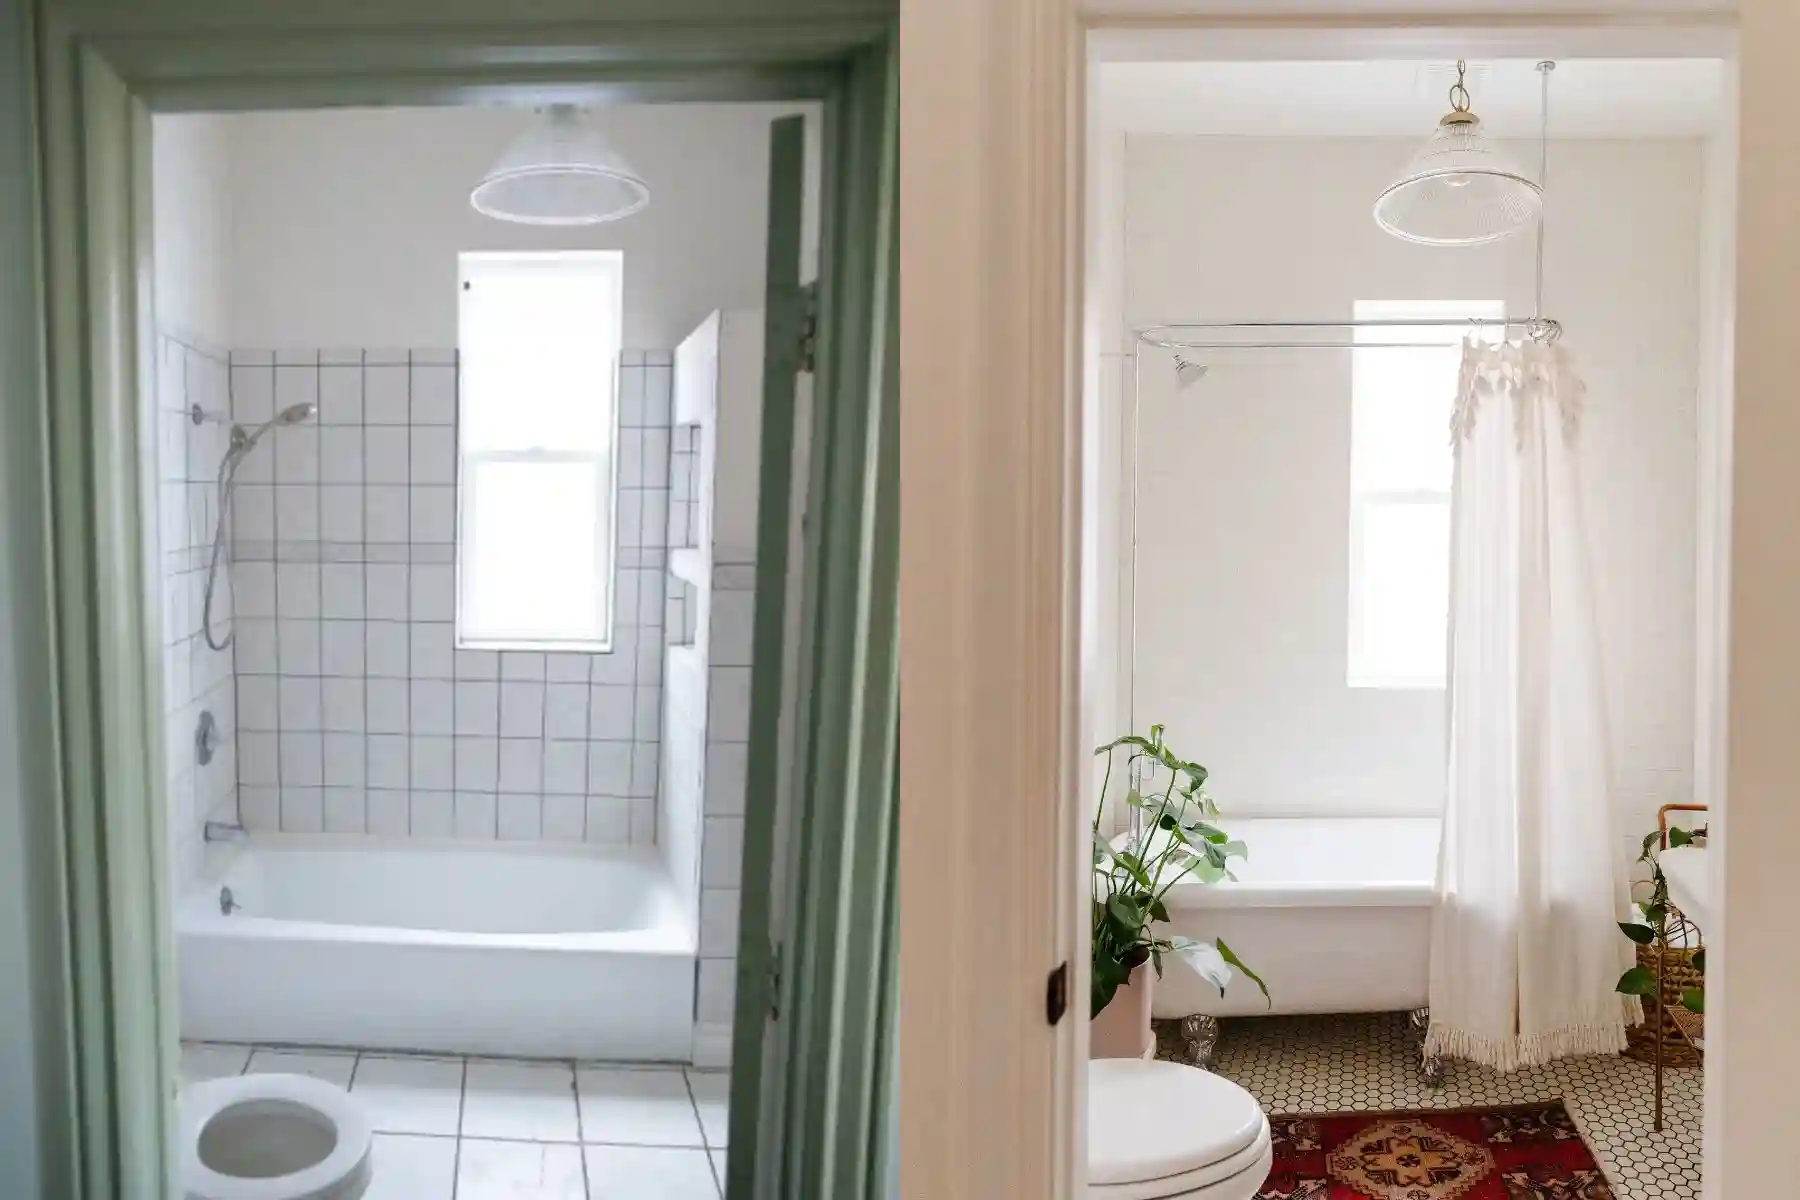 On the left, a before photo of an outdated, square white tiled bathroom, with a green painted doorway. On the right is an after photo of the bathroom with updated tile throughout, refreshed paint on the doorway and walls, and plants, baskets, and a rug help to make the room feel stylish. 